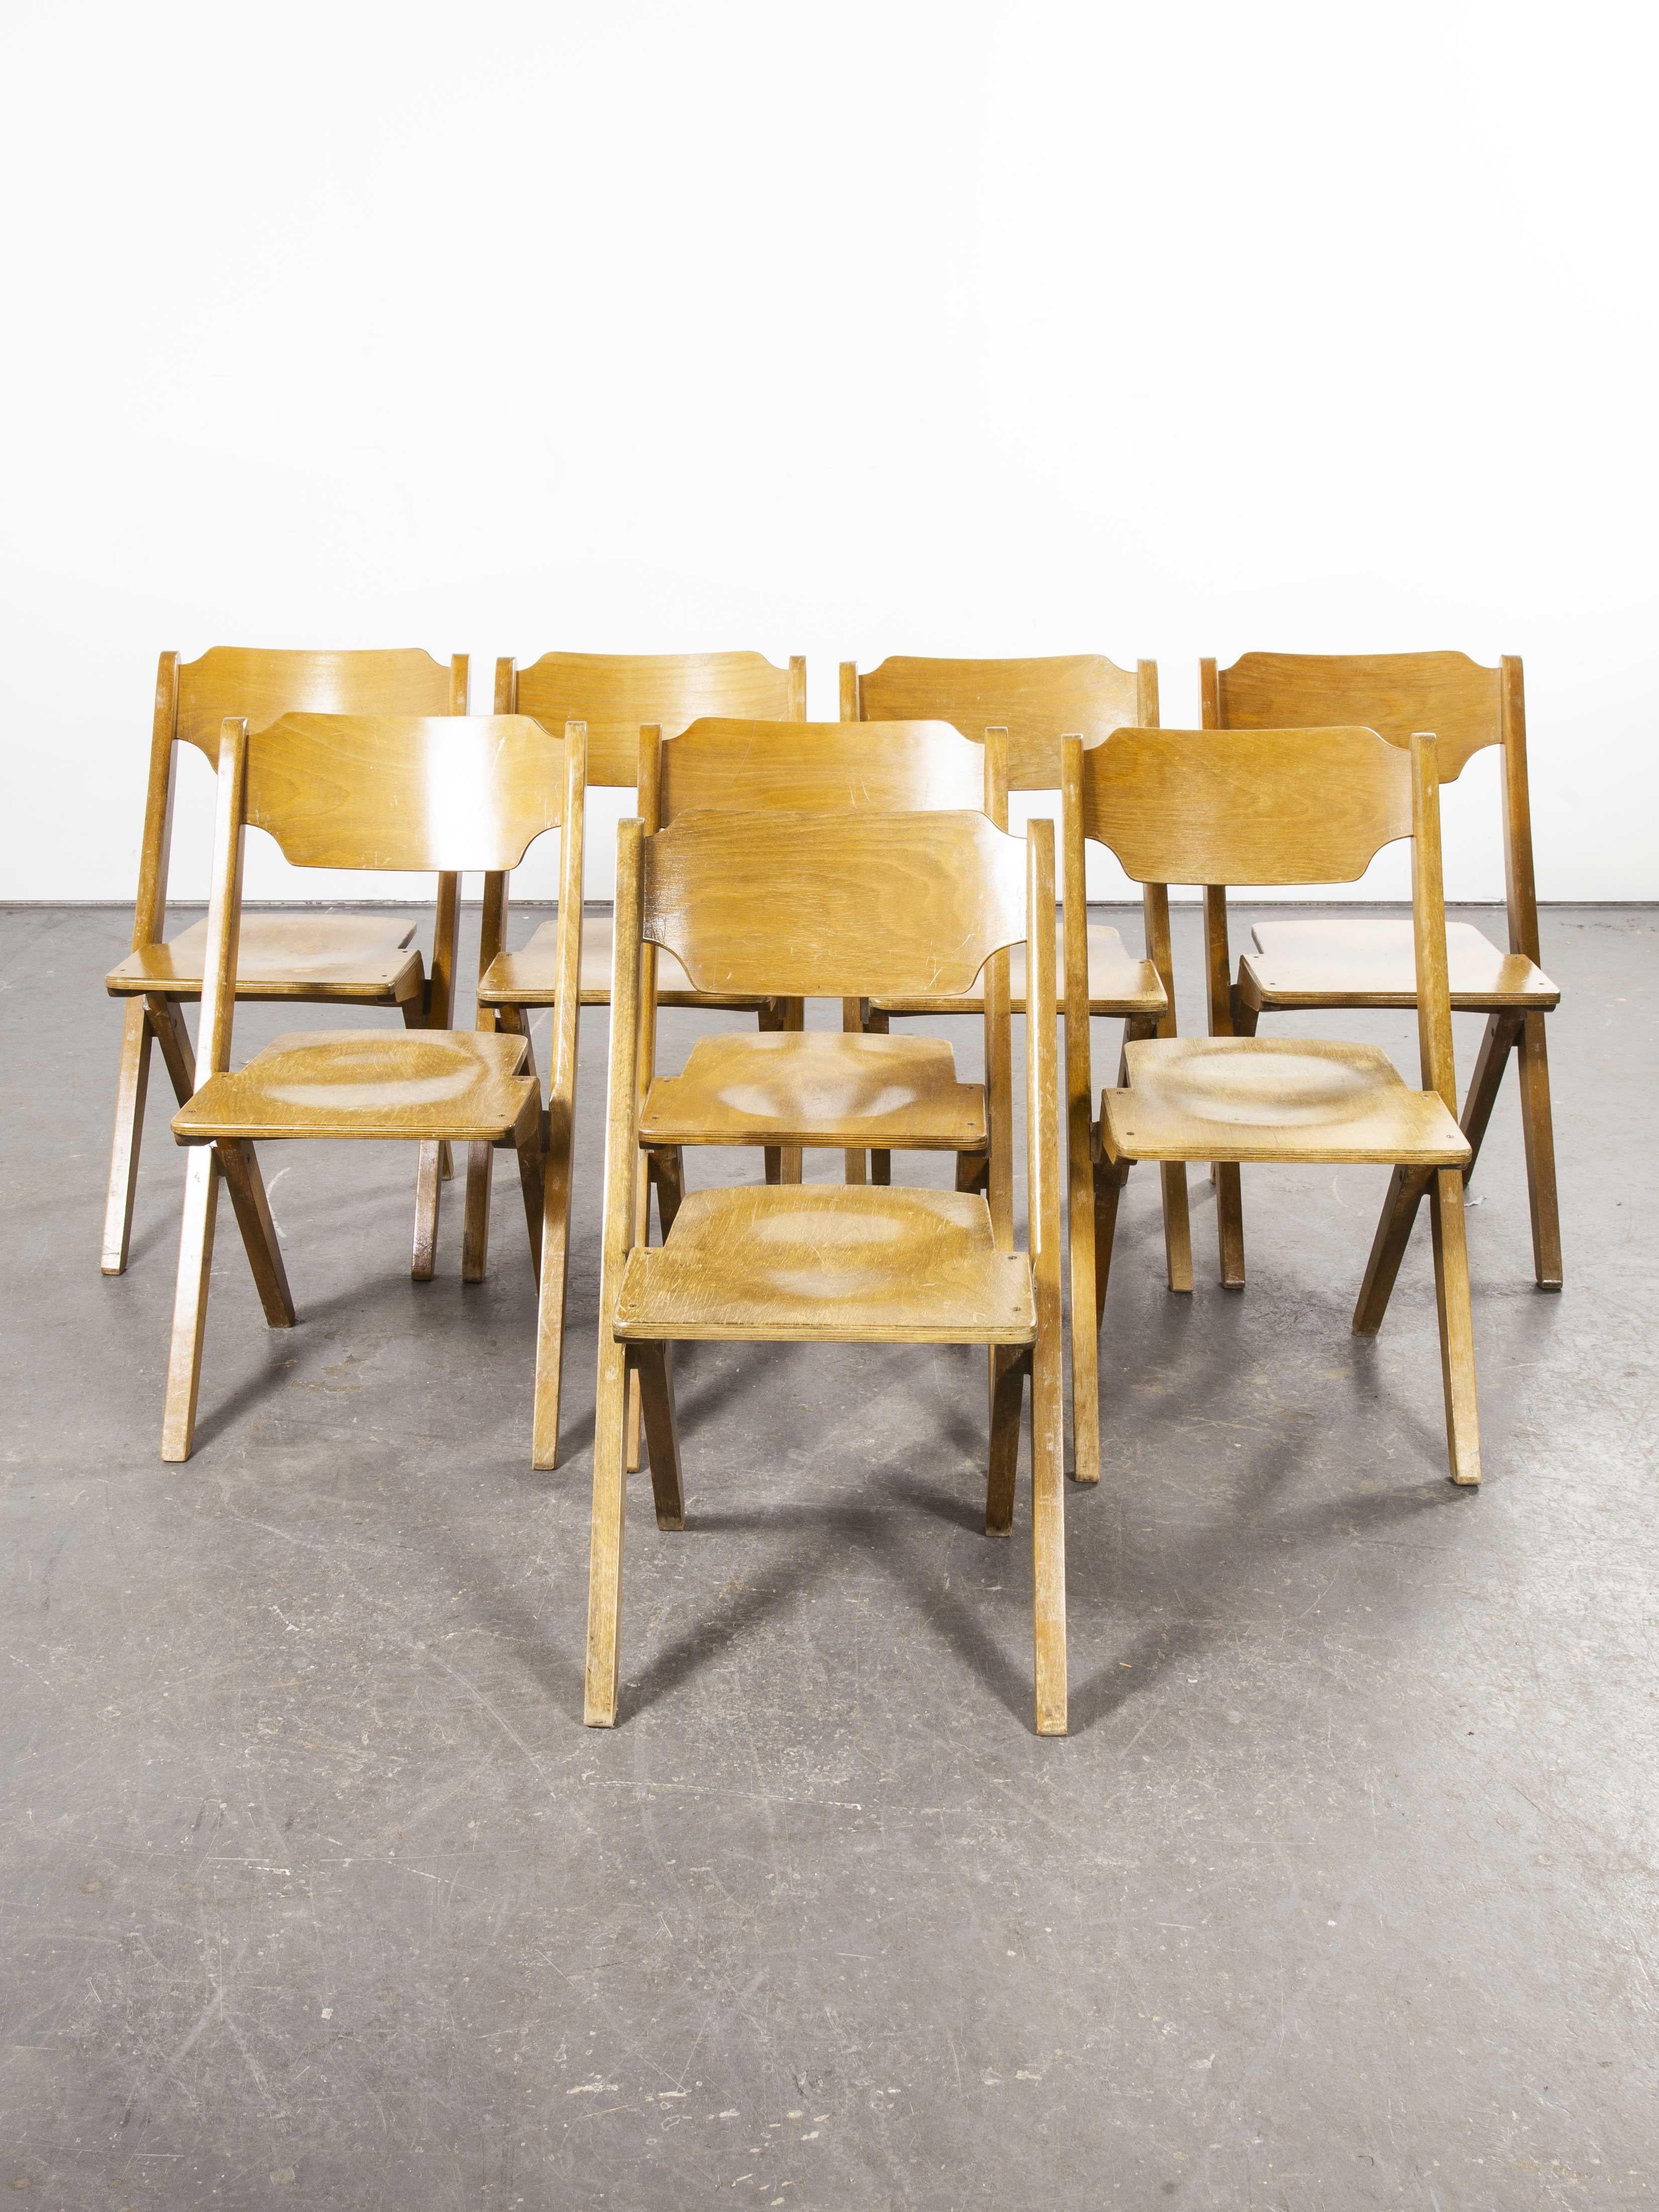 1960s Bombenstabil stacking beech dining chairs, set of eight

1960s Bombenstabil stacking beech dining chairs, set of eight. We believe these chairs were made by Bombenstabil in Germany in the 1950s. They have the aesthetic of a folding chair but